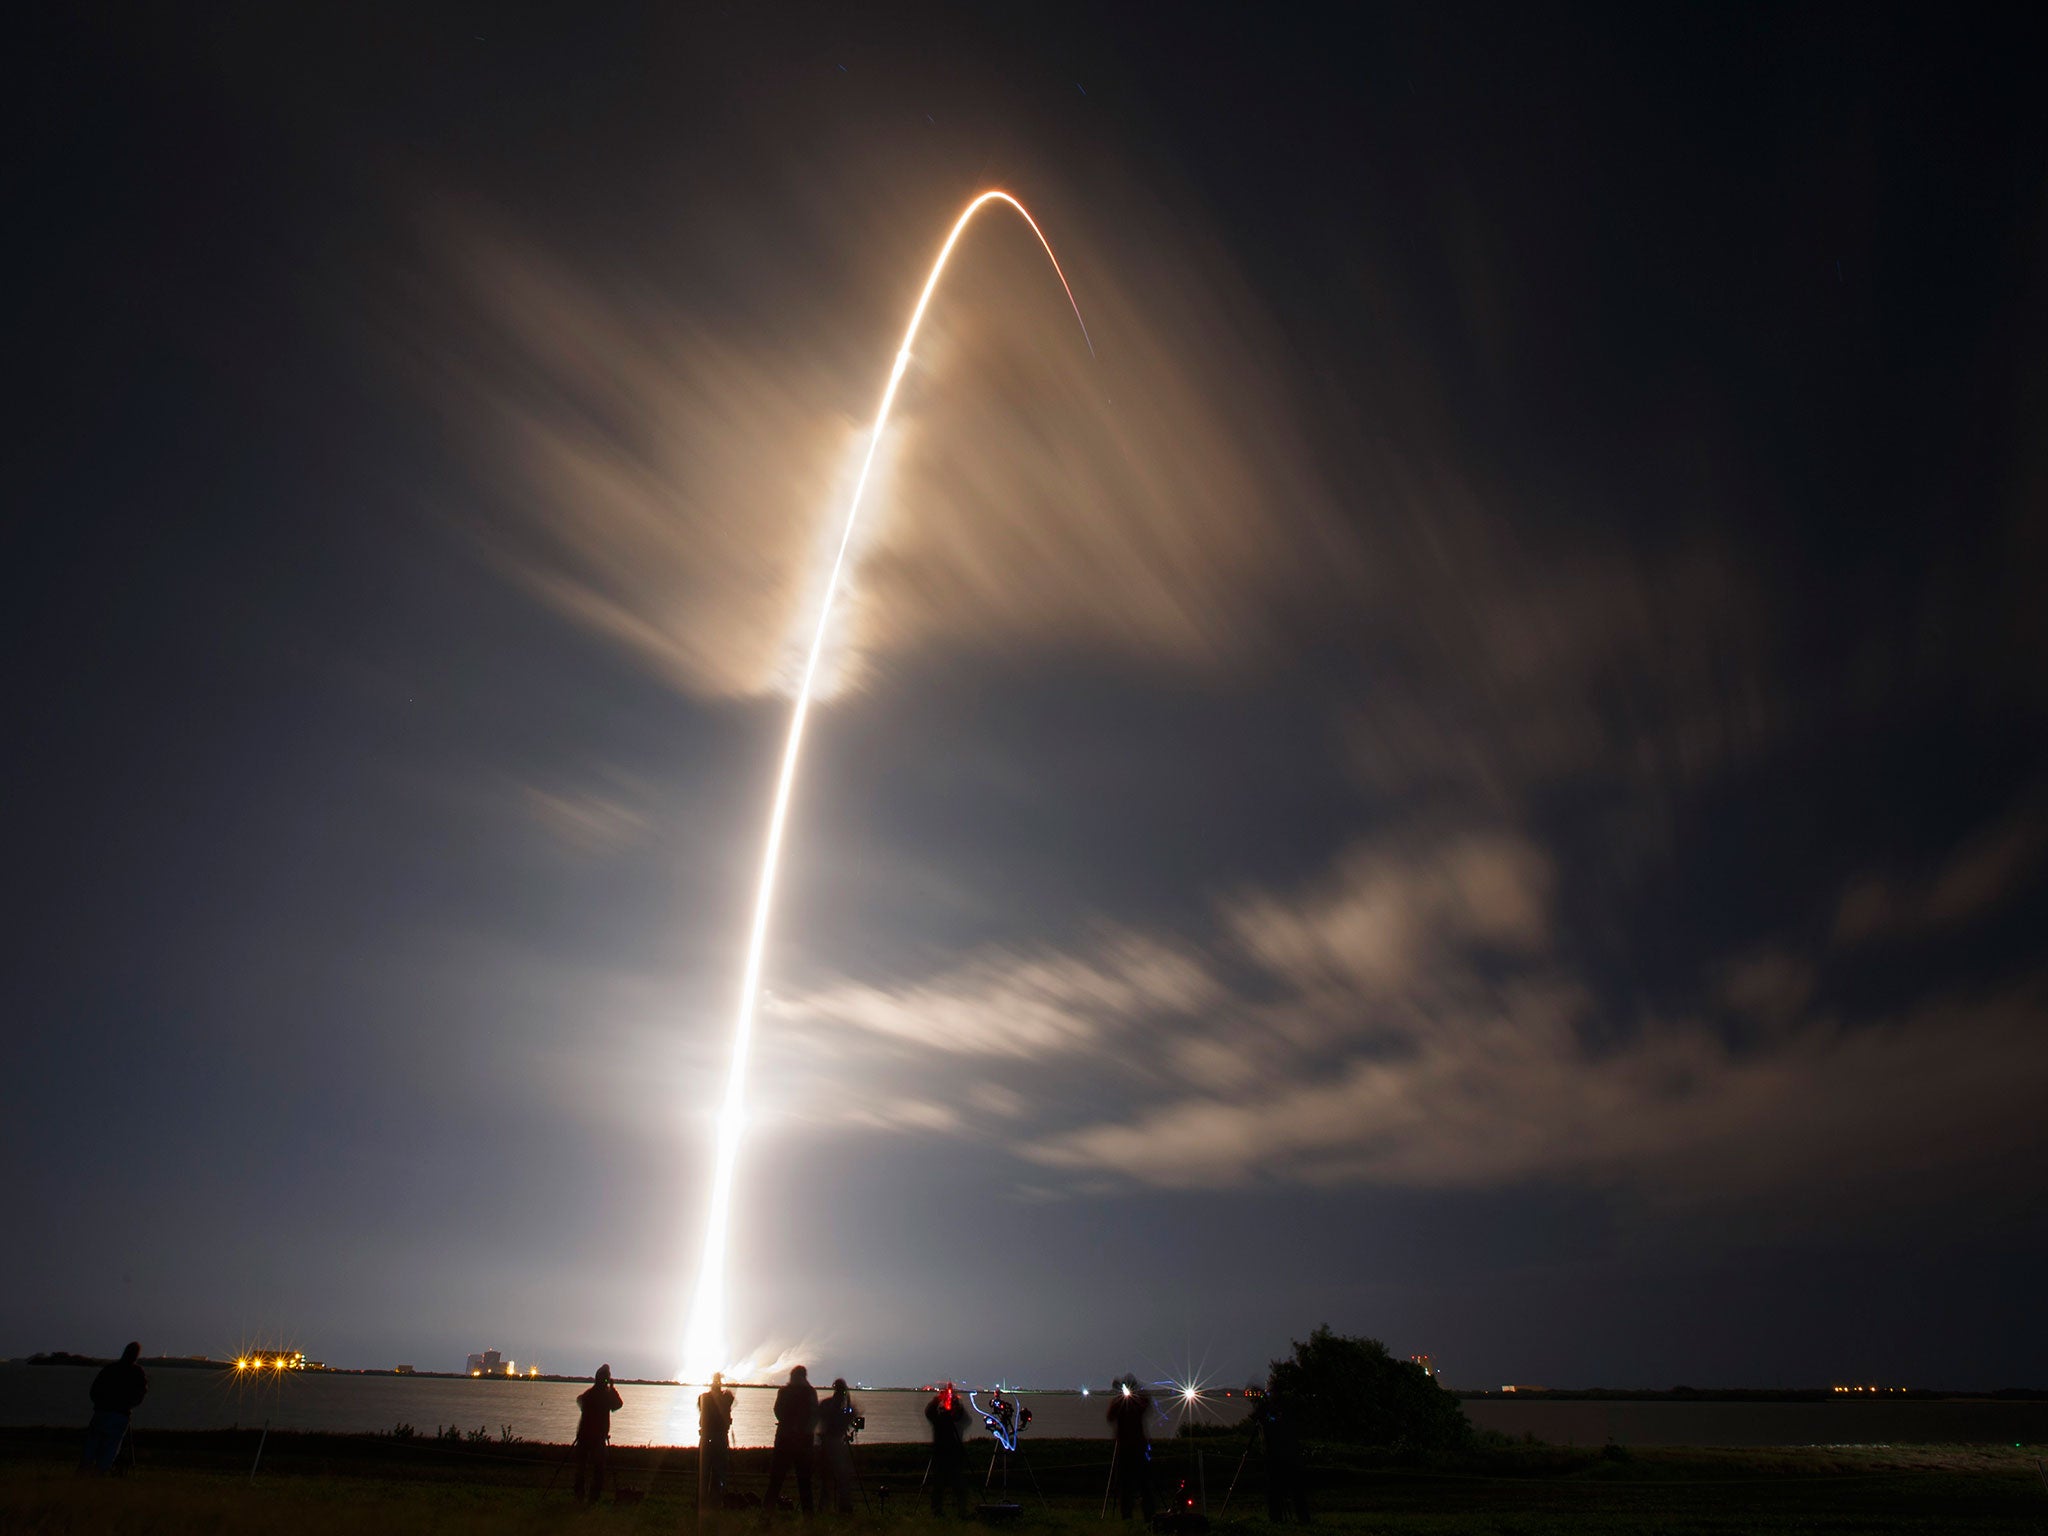 The unmanned Falcon 9 rocket launched by SpaceX, on a cargo resupply service mission to the International Space Station, lifts off from the Cape Canaveral Air Force Station in Cape Canaveral, Florida